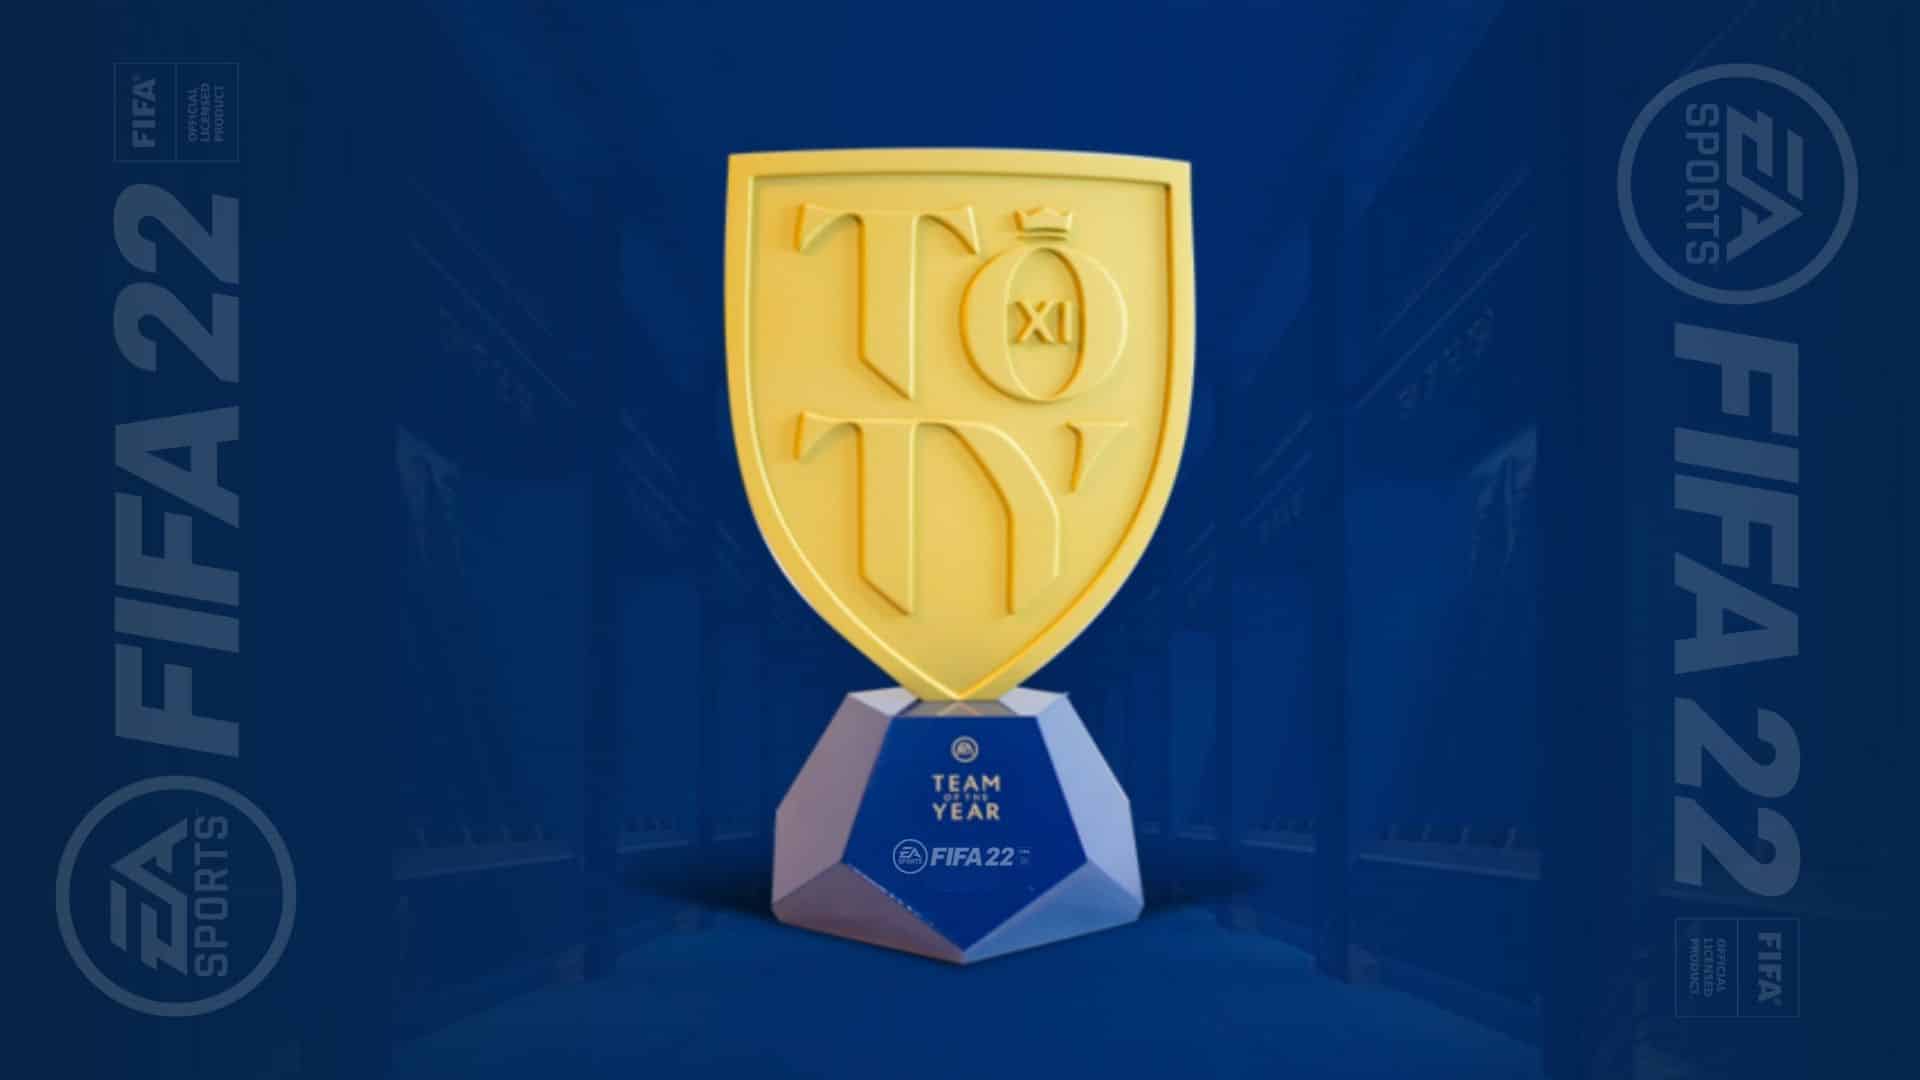 fifa 22 team of the year image with trophy